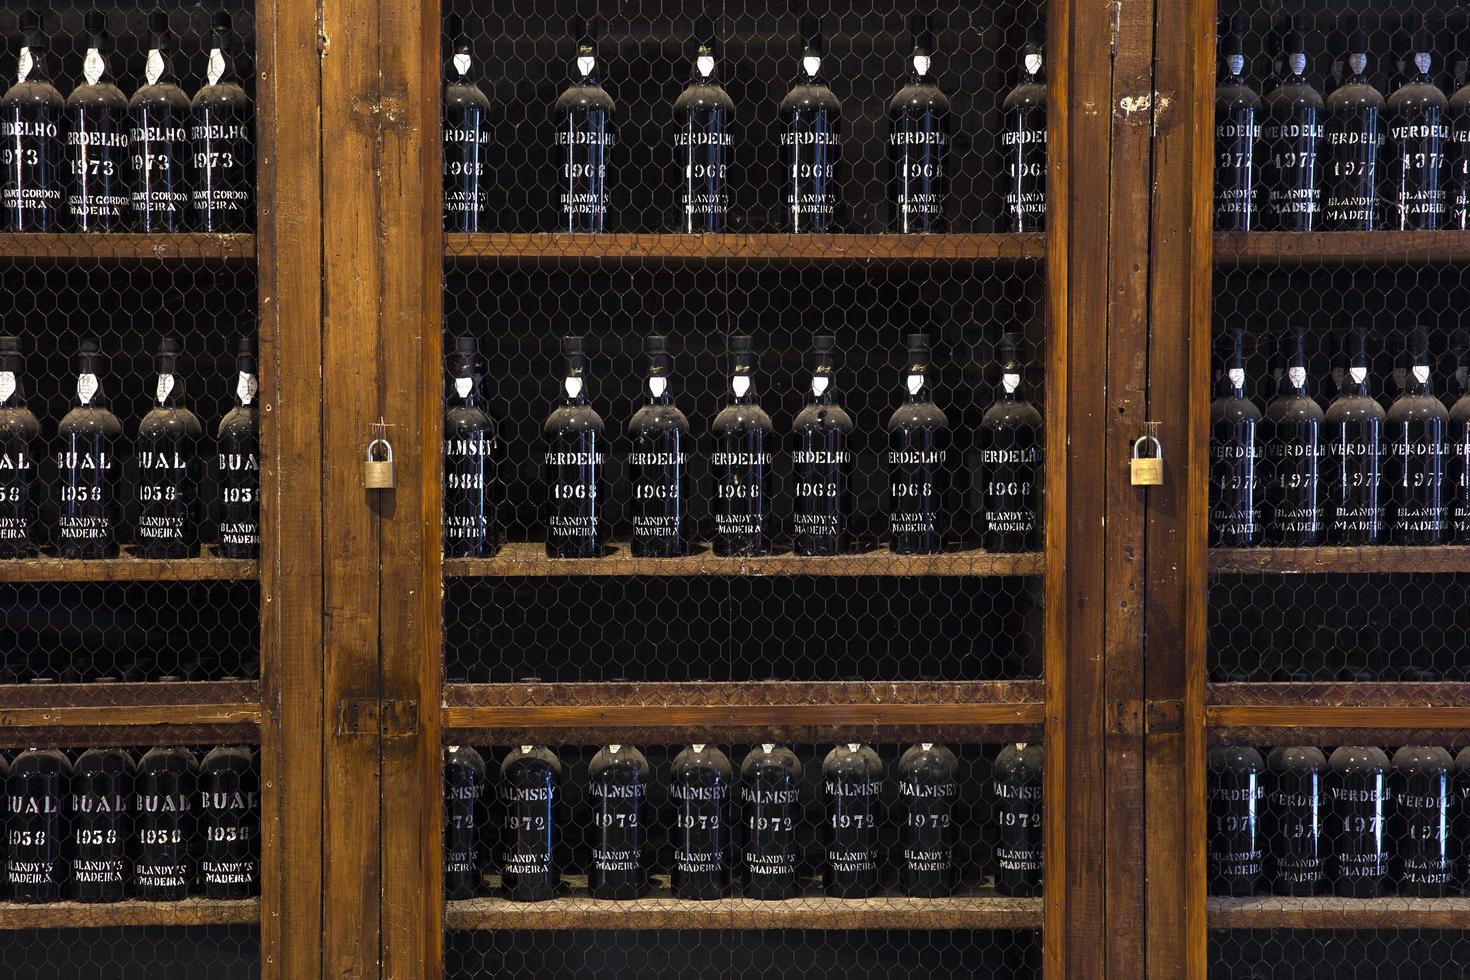 MADEIRA, PORTUGAL, 2020 - Detail of Blandy's wine storage of vintage Madeira wine in Portugal. It is a family-owned wine company founded by John Blandy in 1811. photo